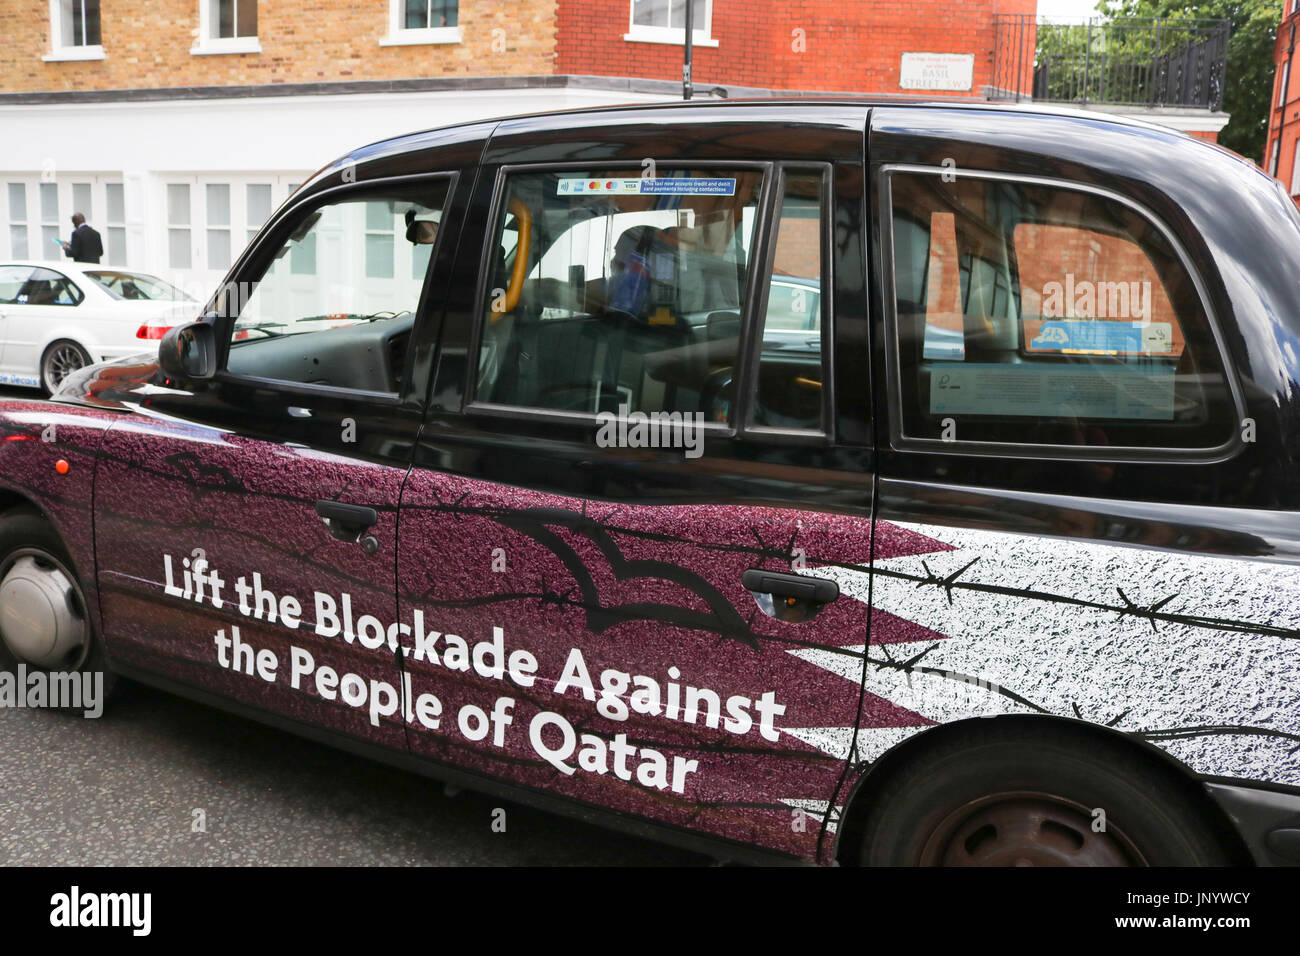 London, UK. 31st July, 2017. A London Taxi with livery calling for the lifting of the economic blockade against the people of Qatar after sanctions were imposed by the Gulf states of Saudi Arabia, Bahrain, Egypt and the United Arab Emirates, which have imposed a land sea air and economic blockade on Qatar since 5 June, accusing the oil rich emirate of supporting terrorism Credit: amer ghazzal/Alamy Live News Stock Photo